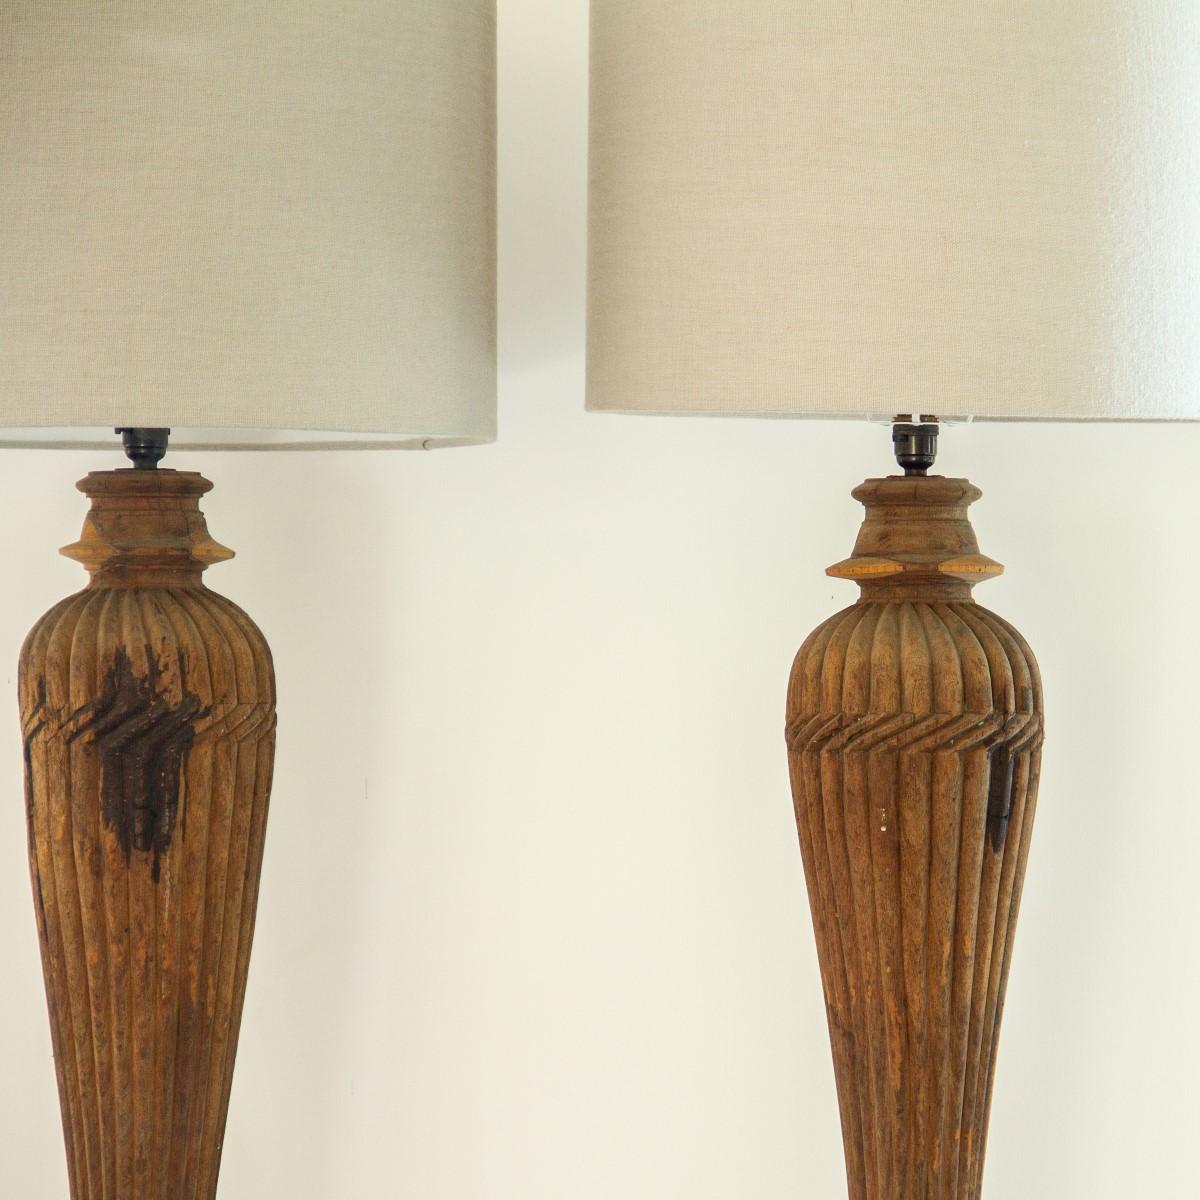 A large pair of substantial Anglo-Indian carved columns circa 1800 converted into lamps.
  